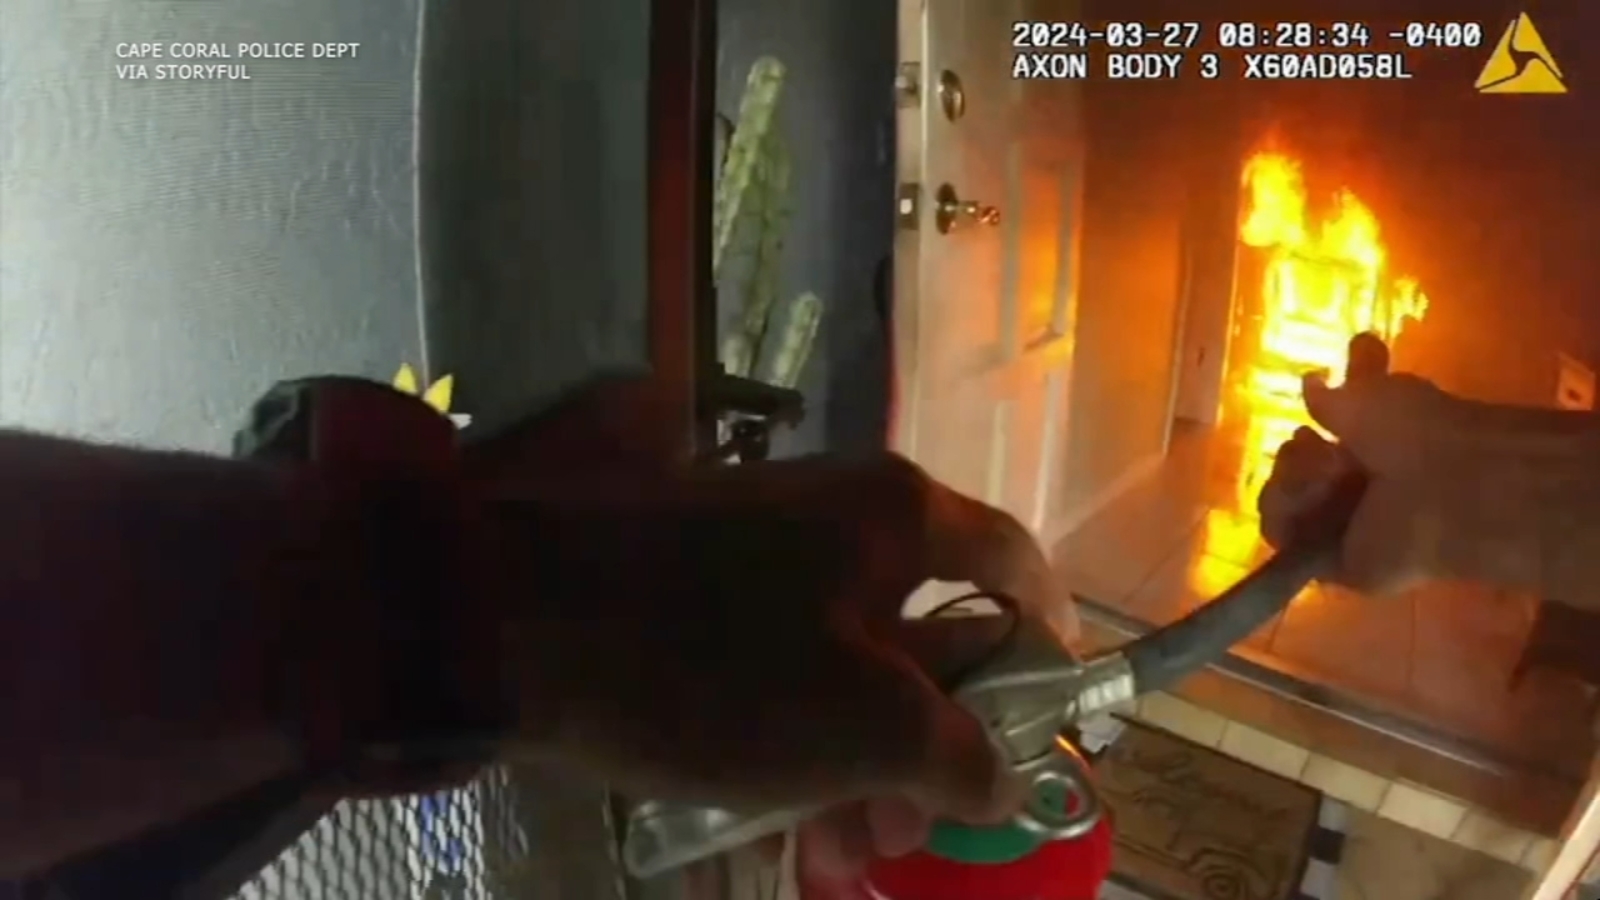 Fire in Cape Coral today: Police rescue amputee from burning home in Cape Coral, Florida, bodycam video shows